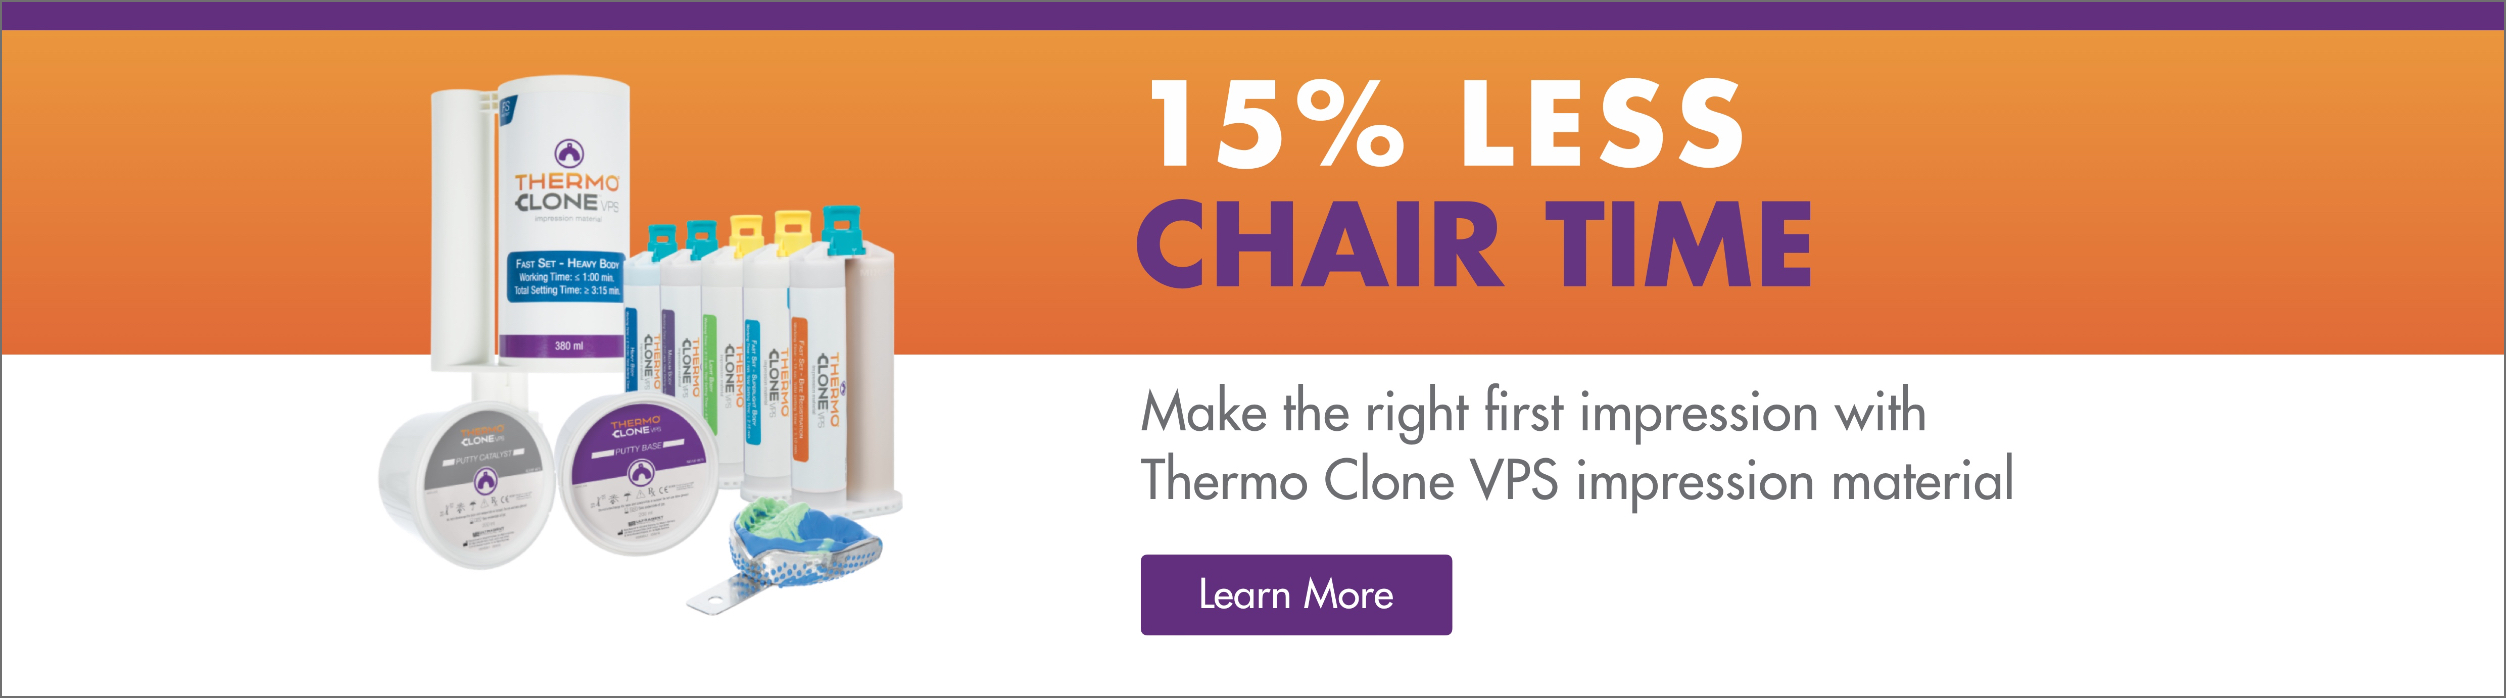 Thermo Clone Homepage Banner